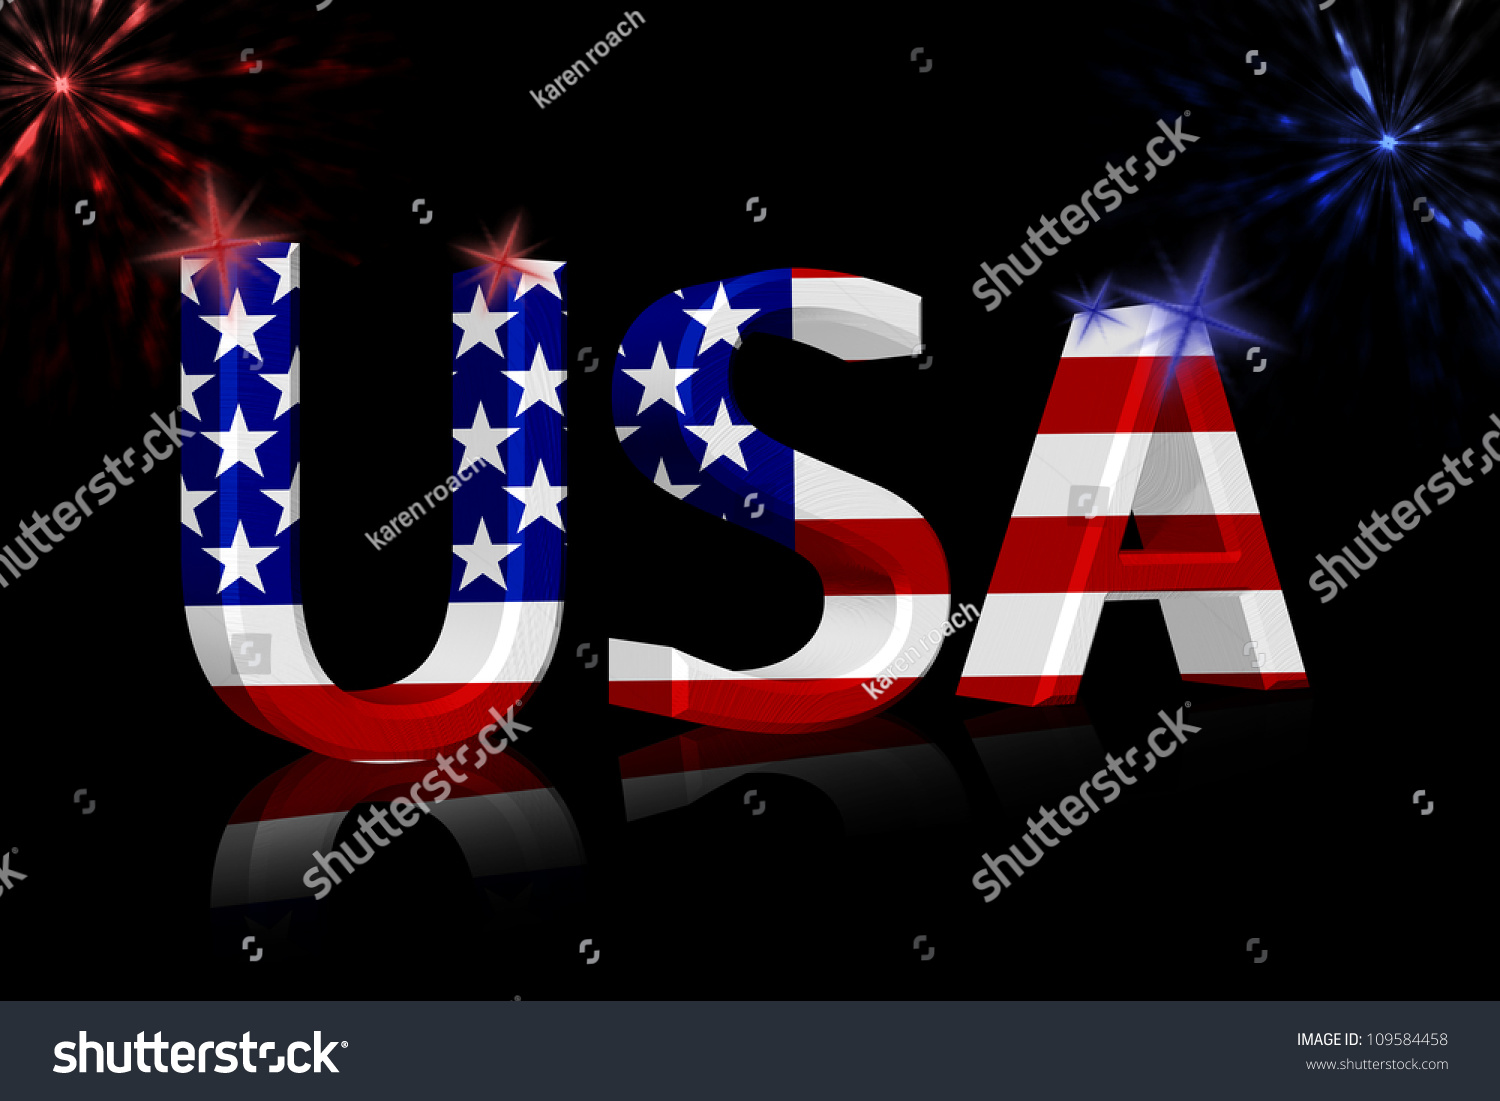 The Word Usa In The American Flag Colors Isolated On Black With ...